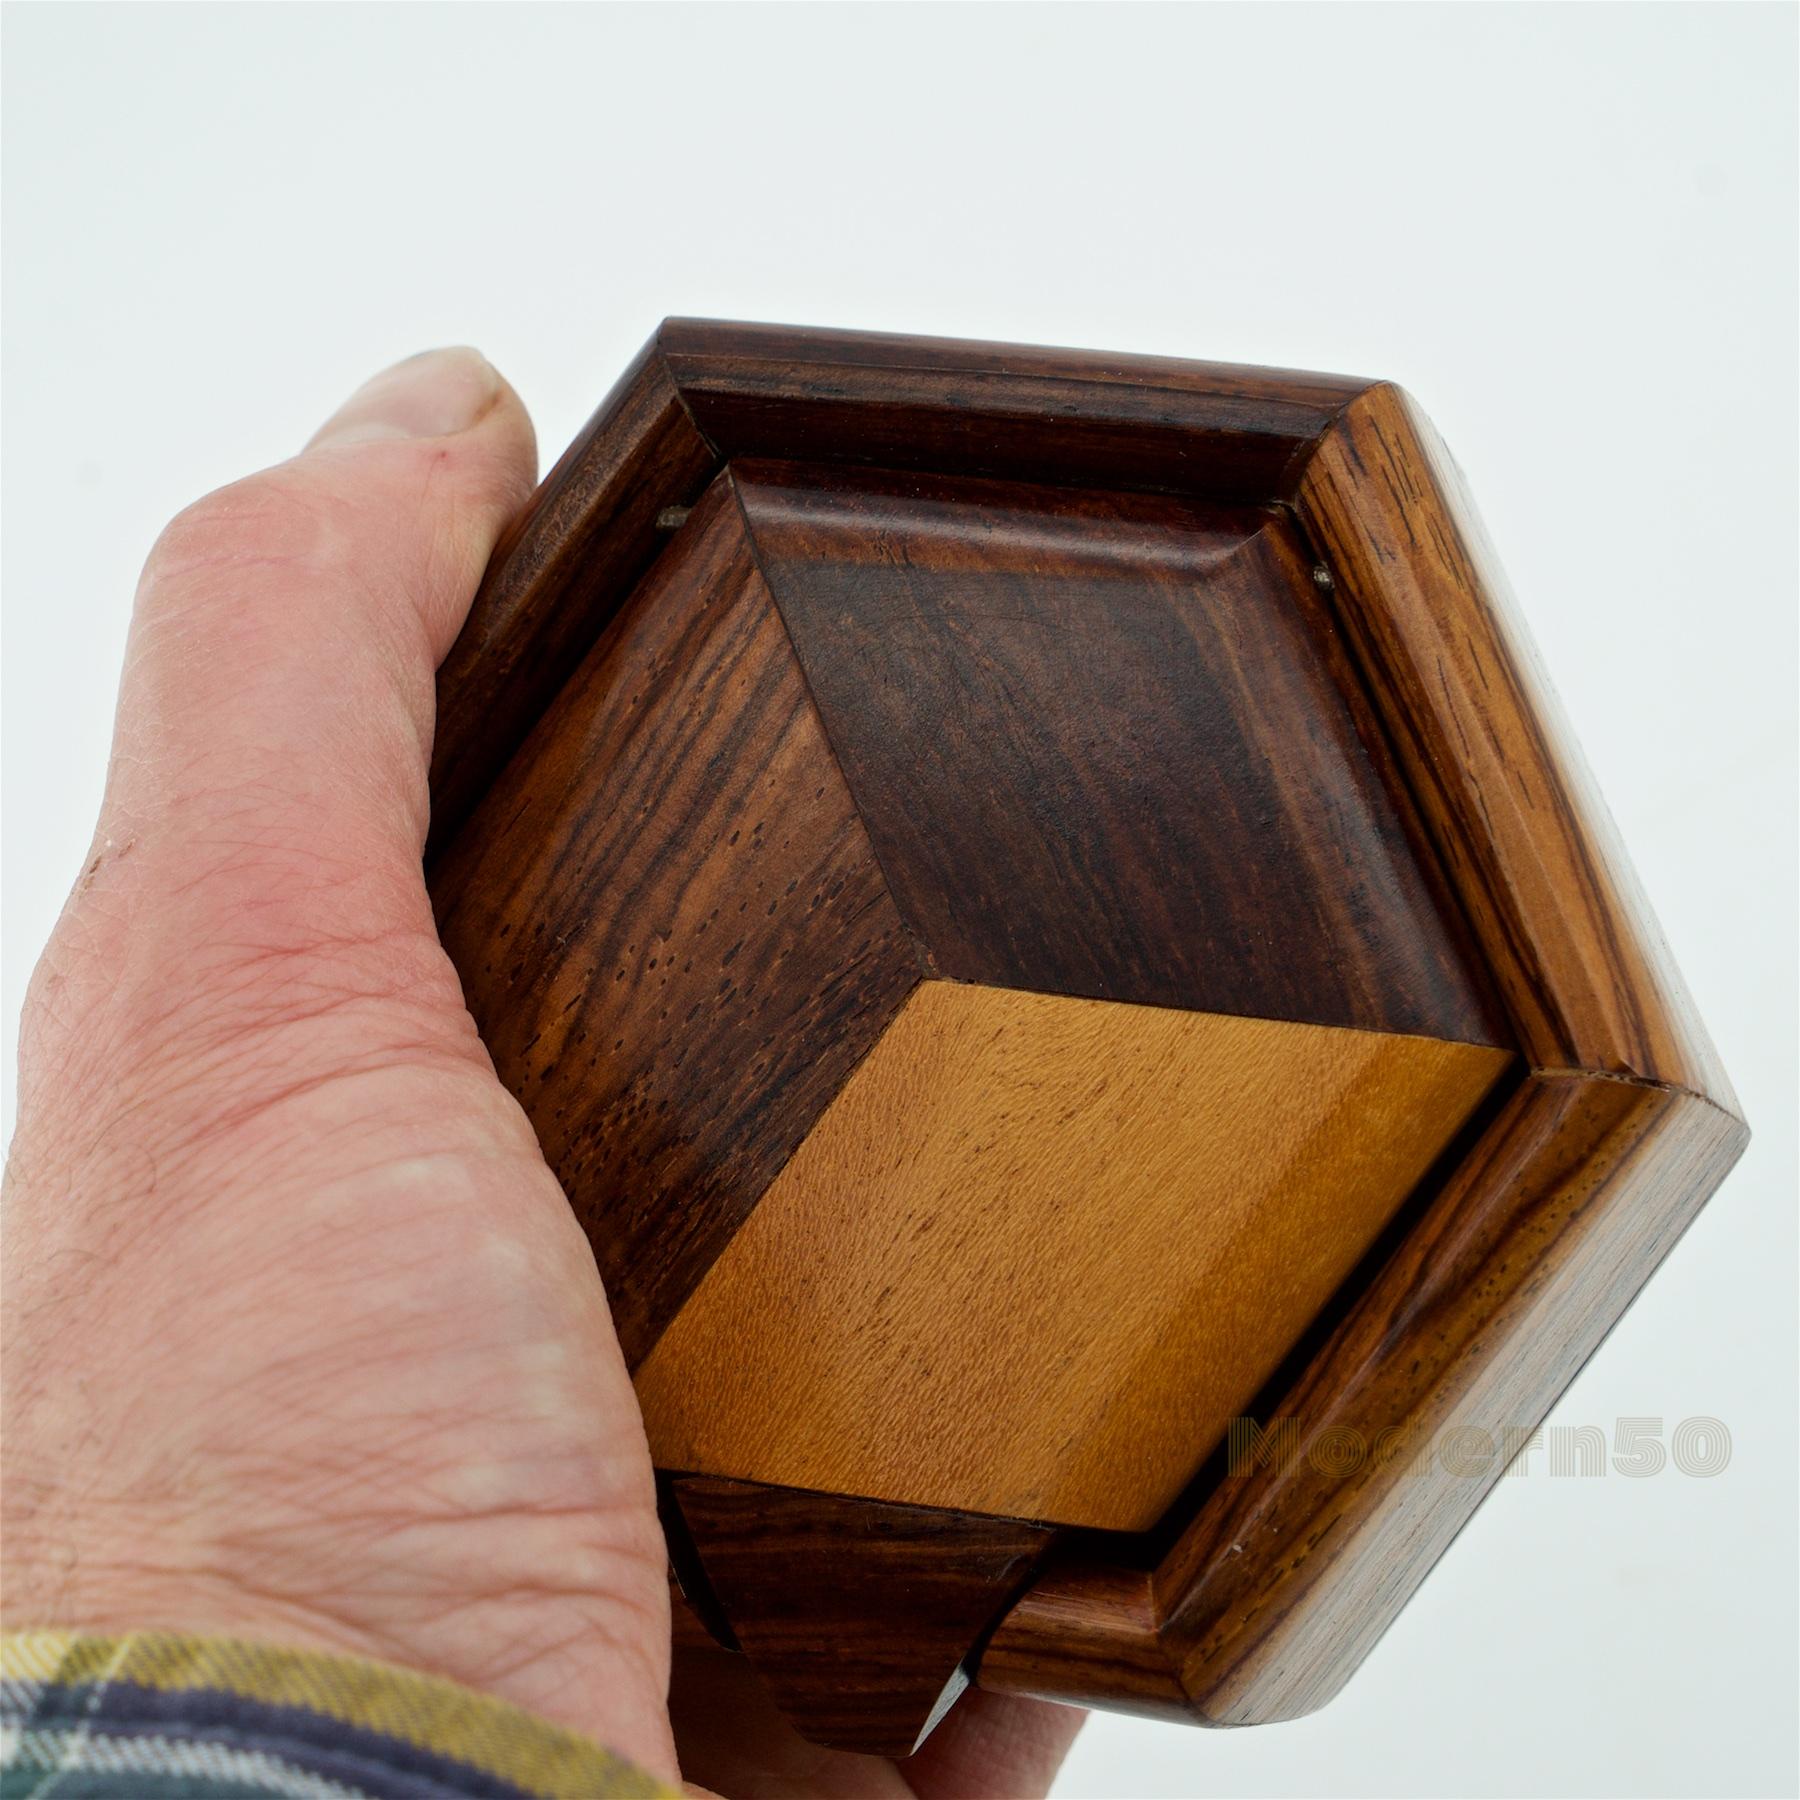 1960s Geometric Jewelry Trinket Geometric Box Mexican Craft Eclectic Woodworker For Sale 1